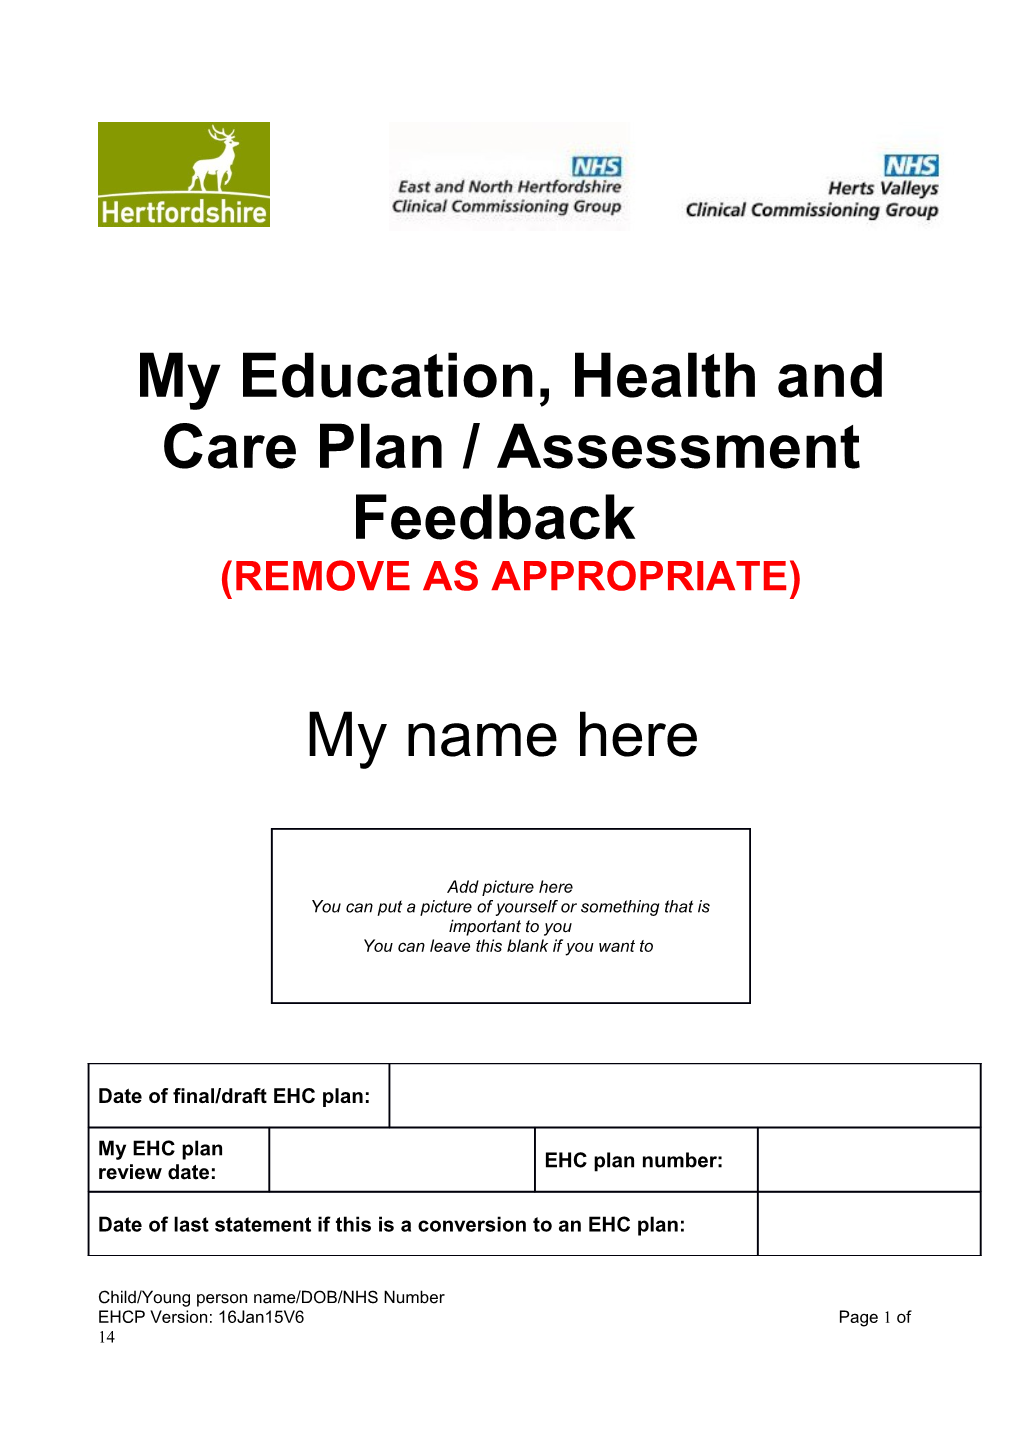 My Education, Health and Care Plan / Assessment Feedback